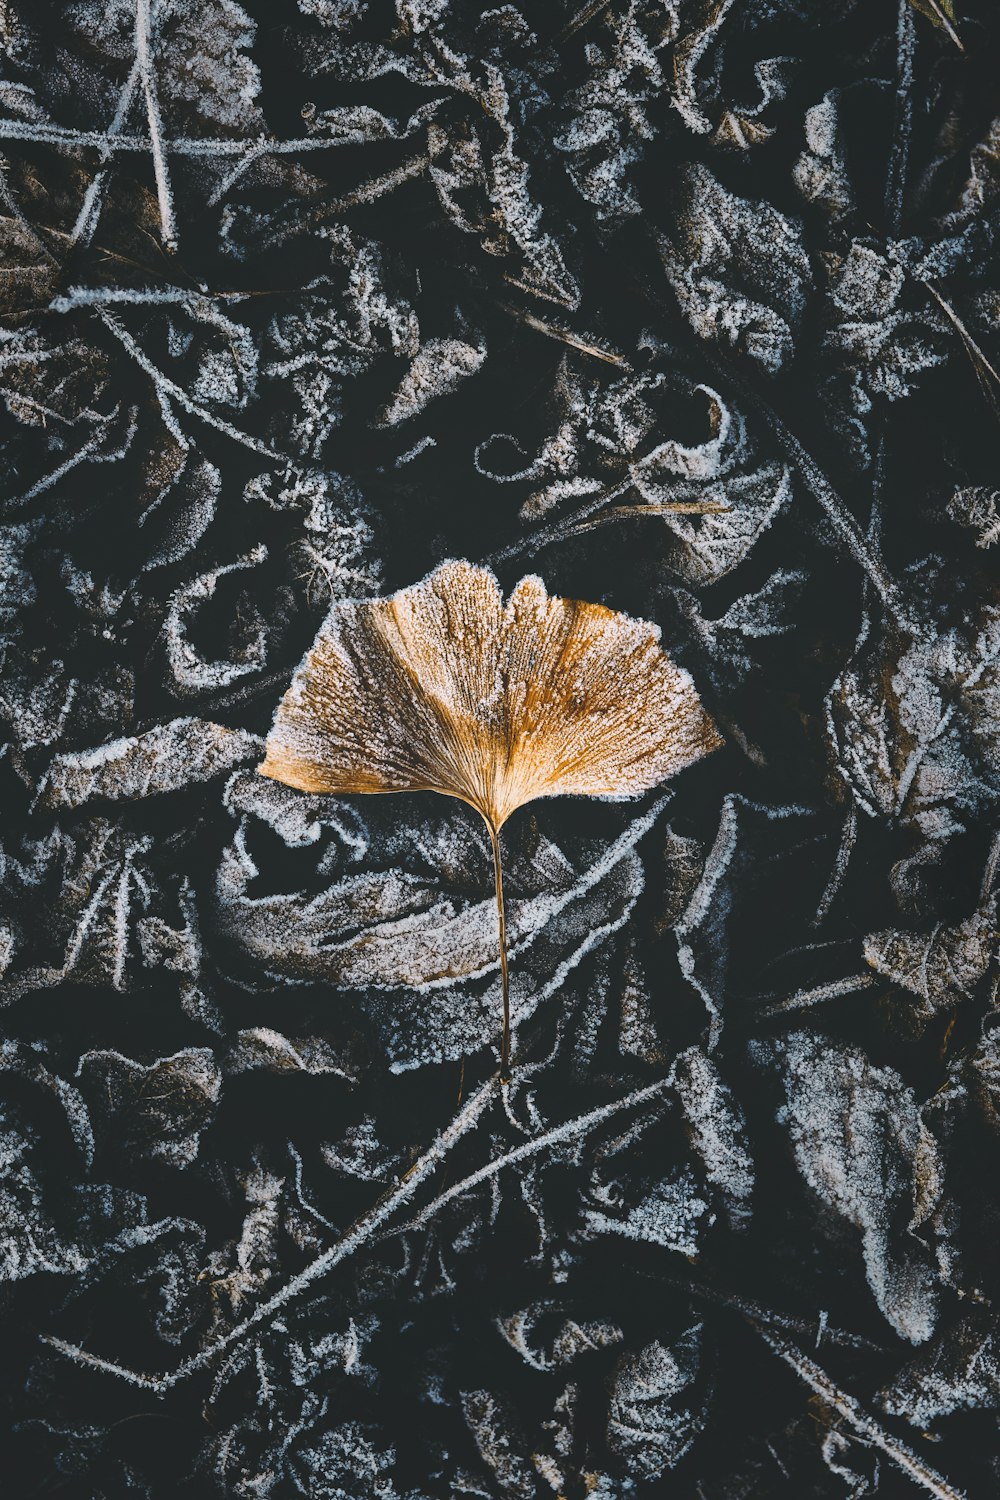 brown dried leaf on black and gray soil